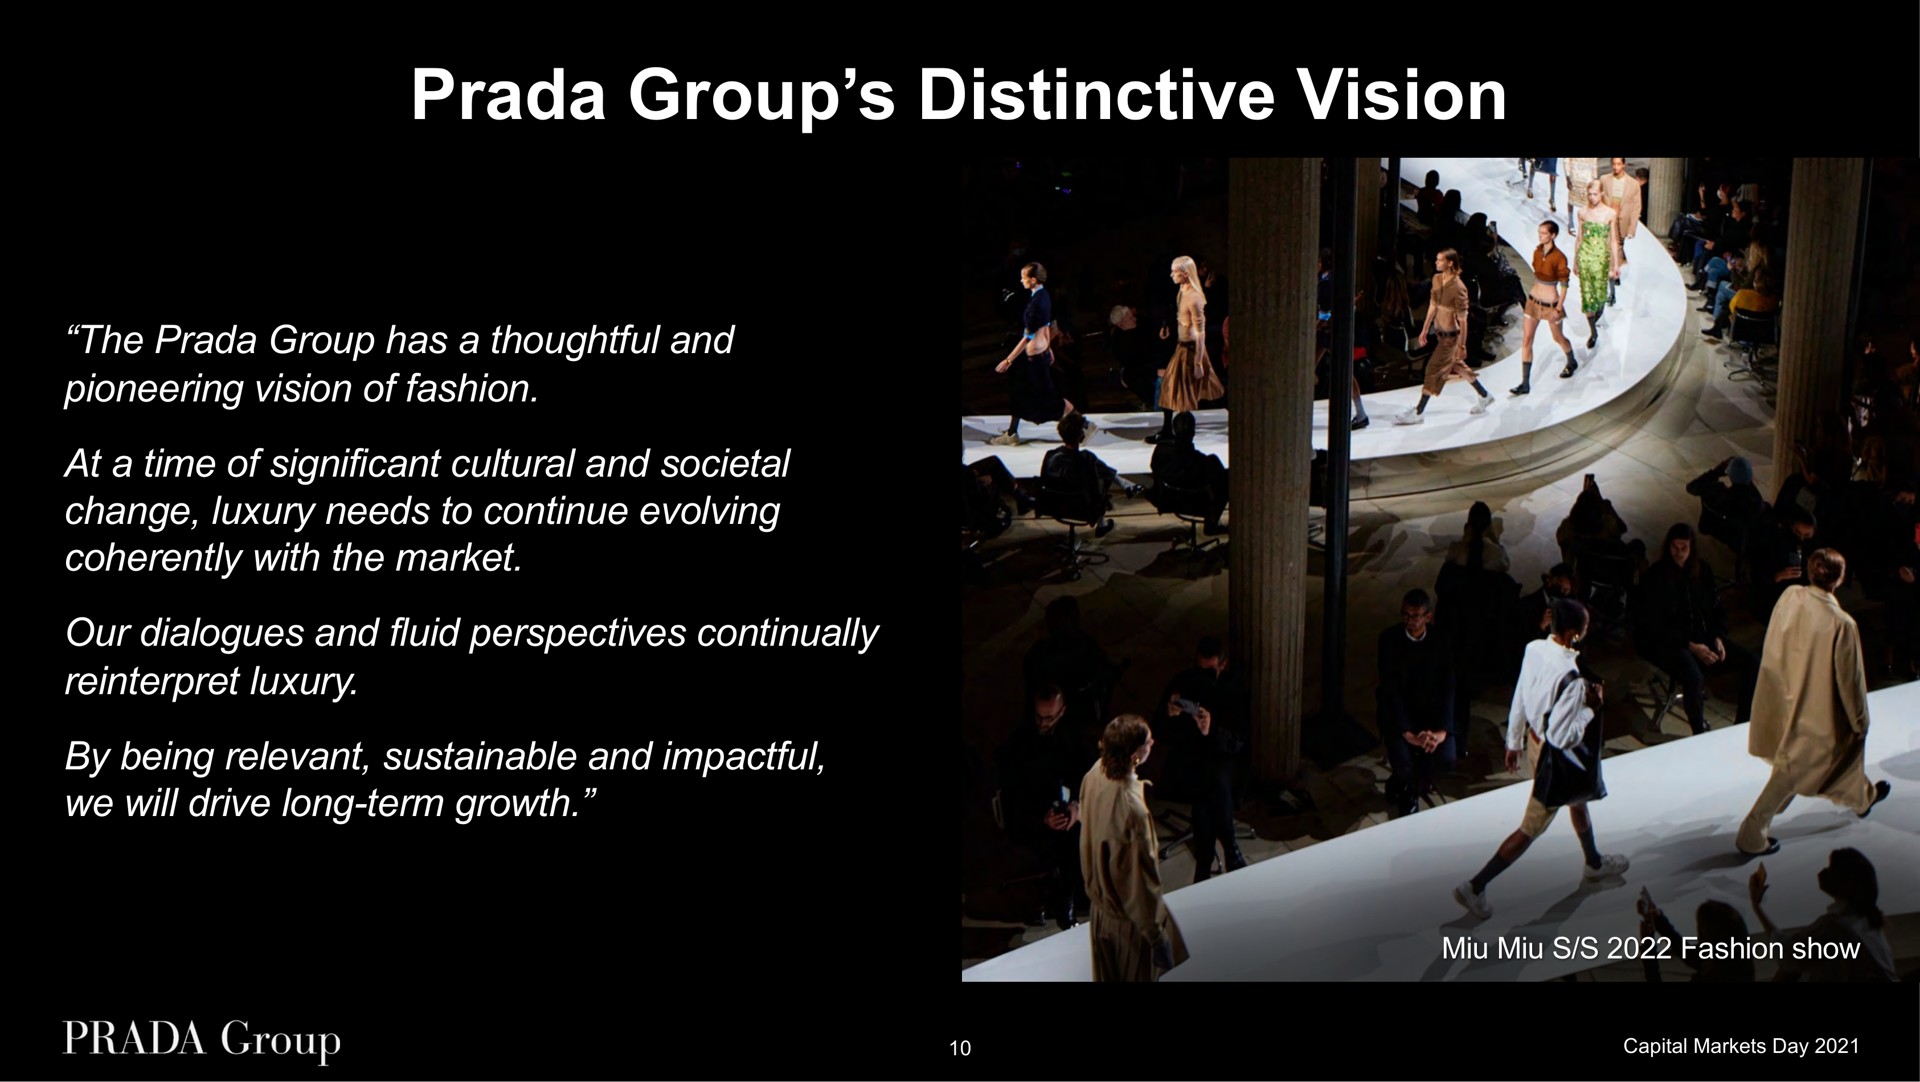 group distinctive vision the group has a thoughtful and pioneering vision of fashion at a time of significant cultural and societal change luxury needs to continue evolving coherently with the market our dialogues and fluid perspectives continually reinterpret luxury by being relevant sustainable and we will drive long term growth fashion show | Prada